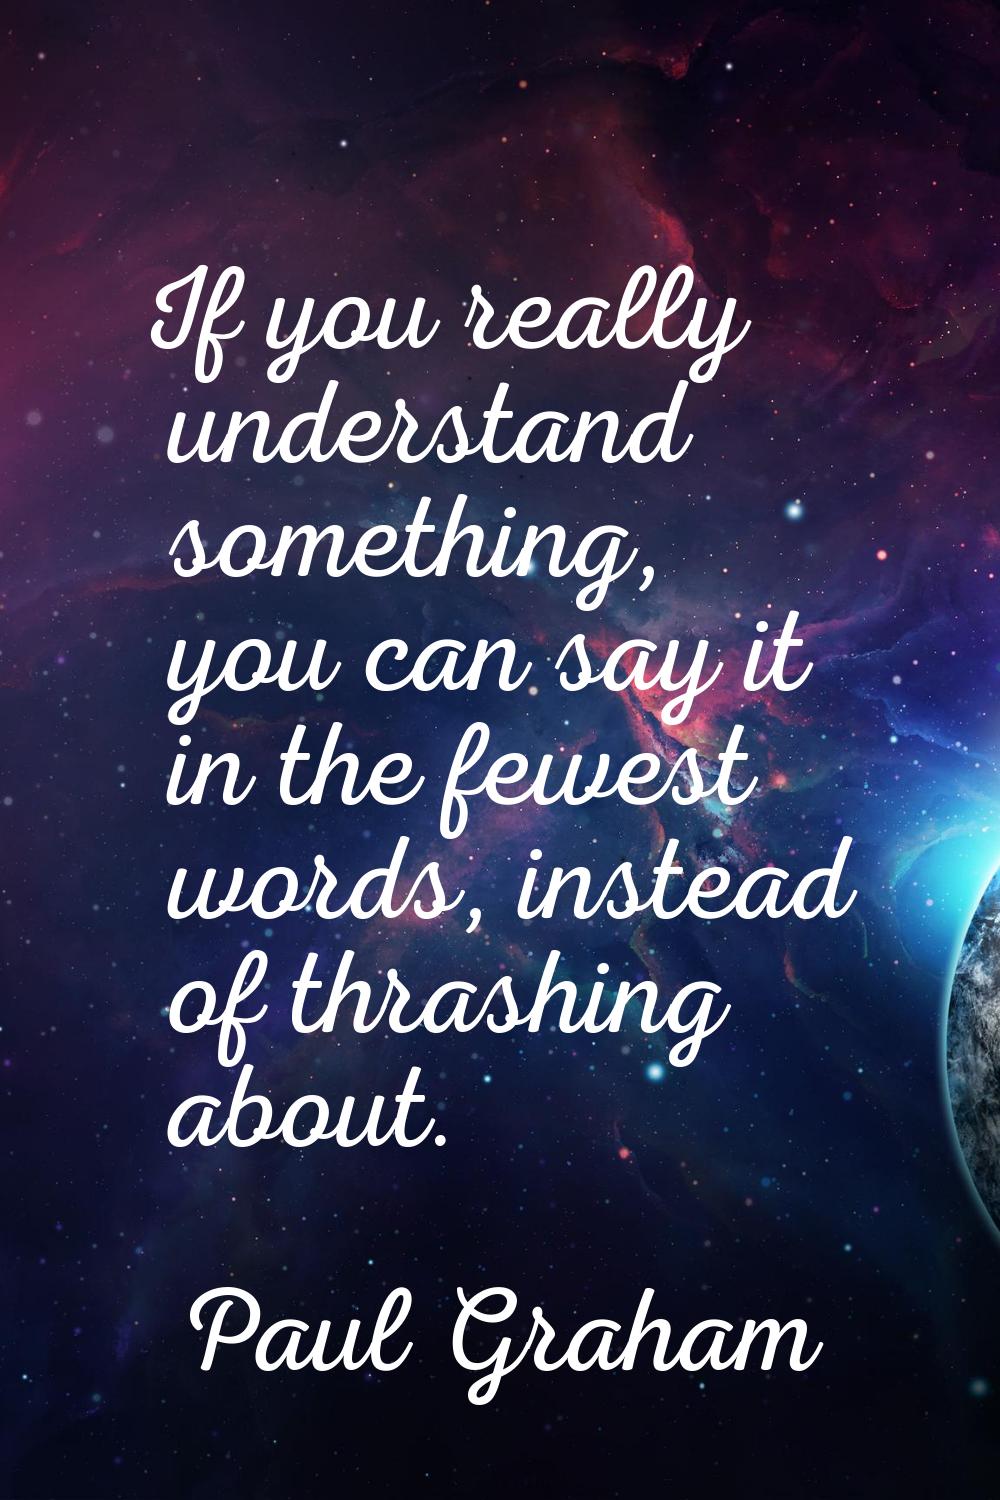 If you really understand something, you can say it in the fewest words, instead of thrashing about.